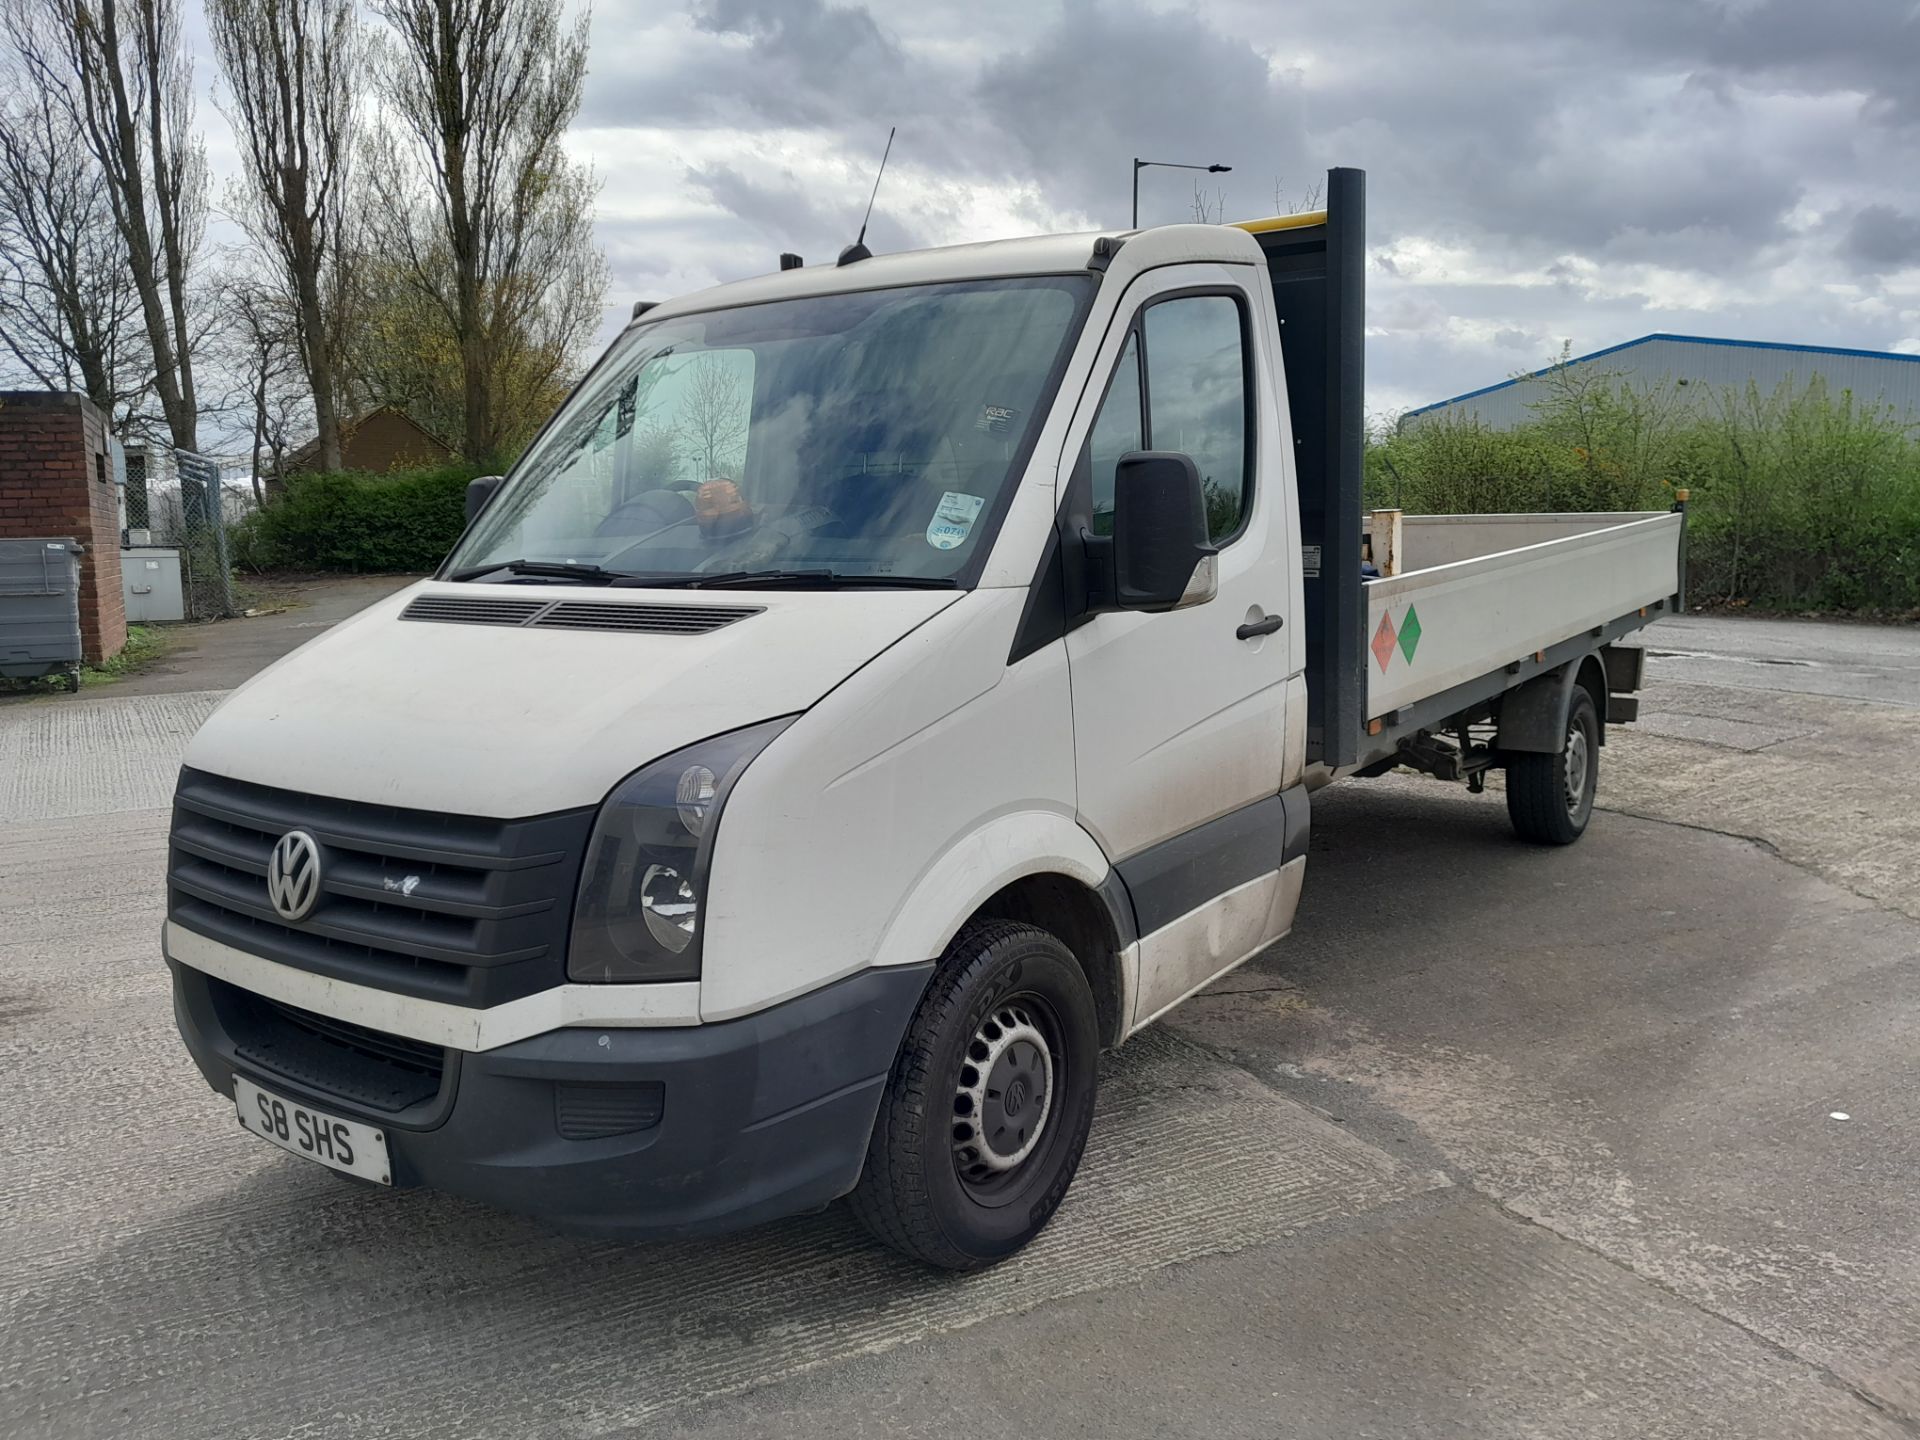 Volkswagen Crafter CR35 LWB 2.0 TDI Double Cab Dropside Van, with Ingimex Dropside body, - Image 3 of 9